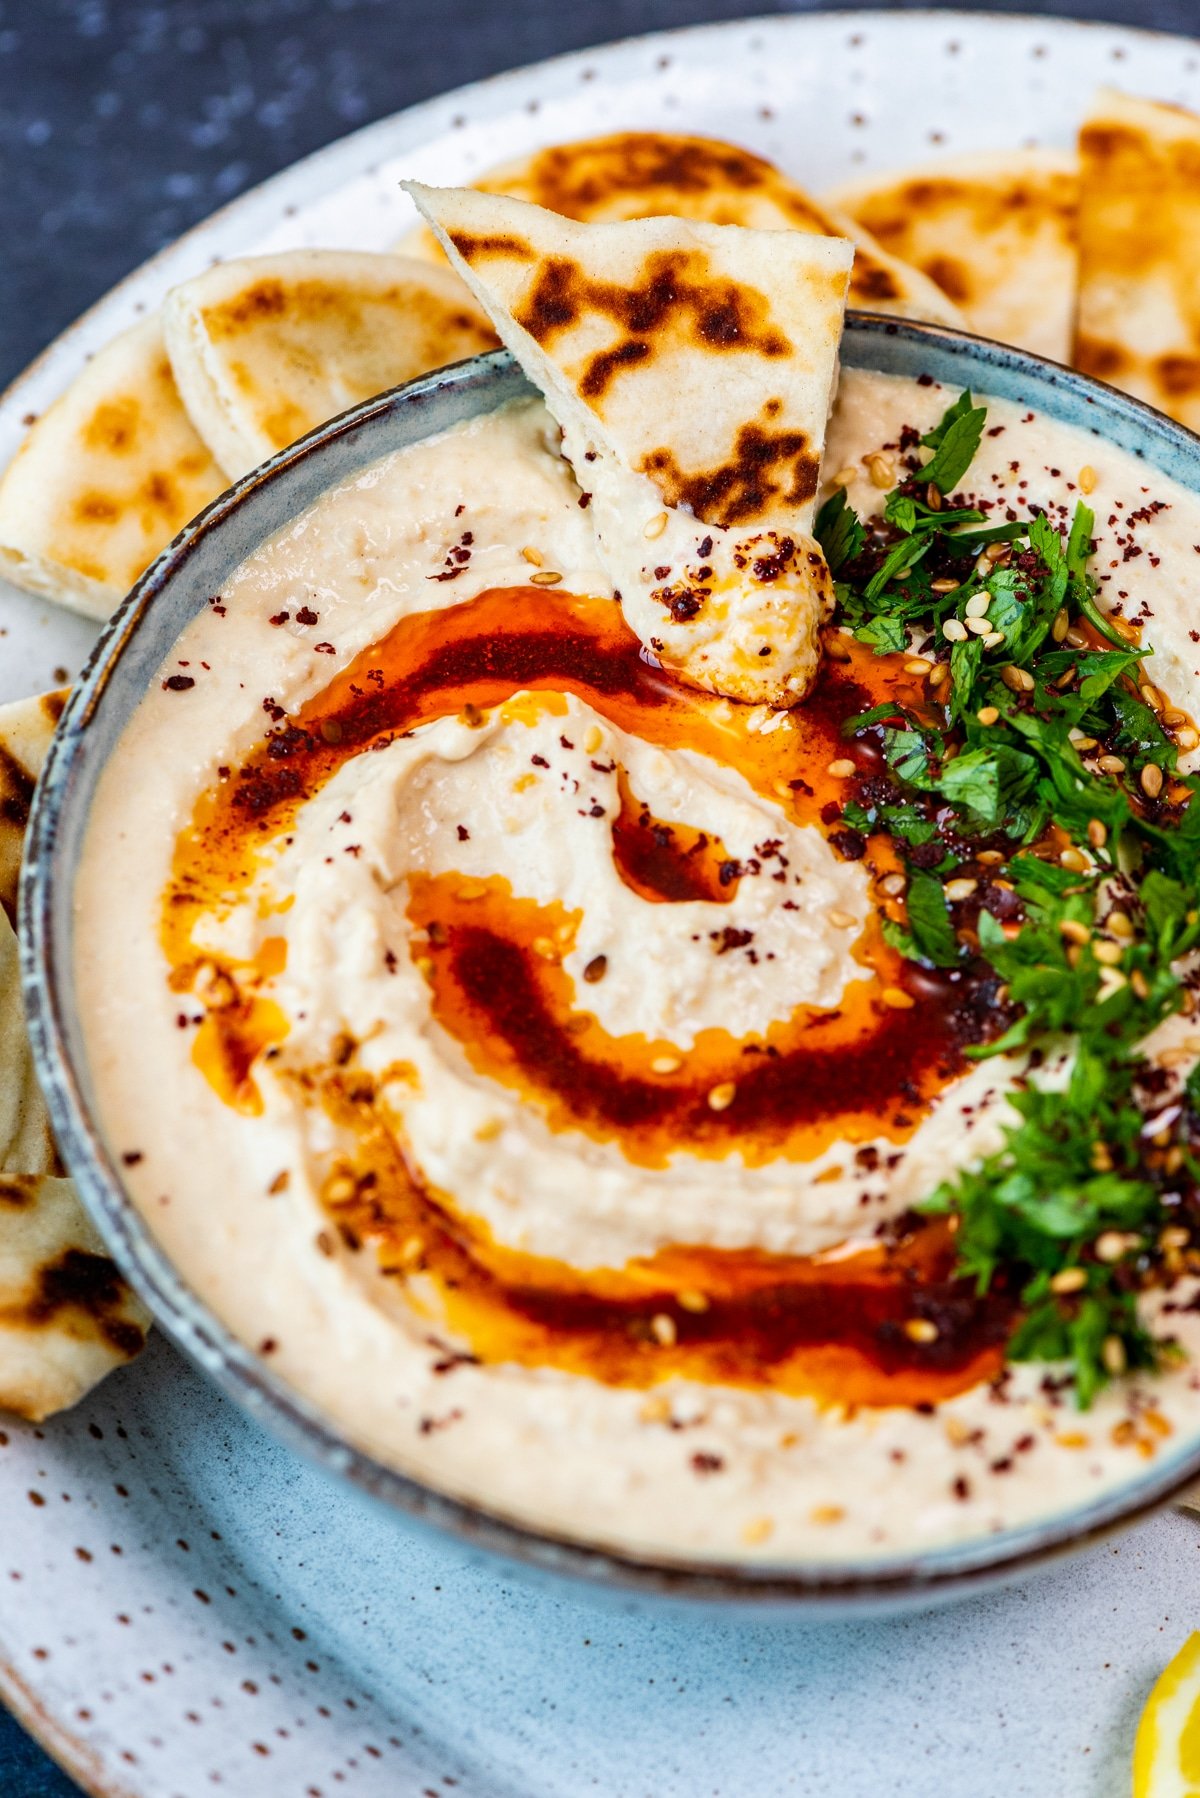 Creamy hummus dip in a bowl garnished with paprika oil, parsley, sumac and sesame seeds and a piece of pide bread in it.